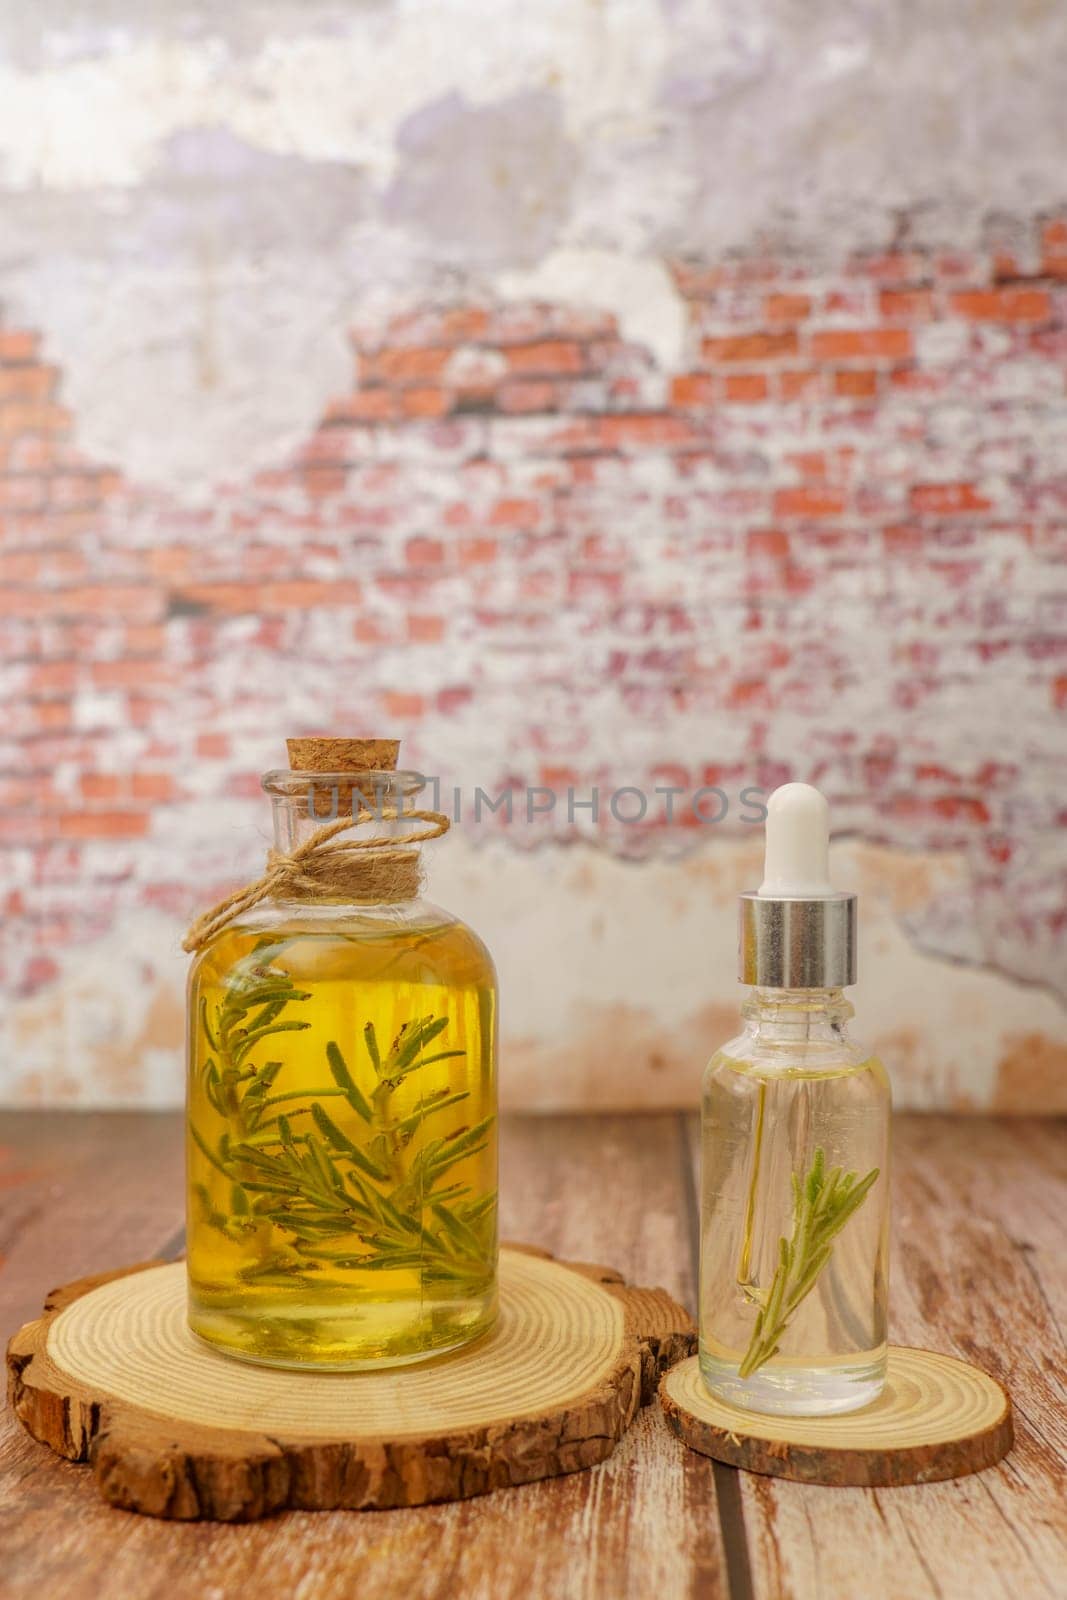 bottle and dropper with rosemary essential oil by joseantona